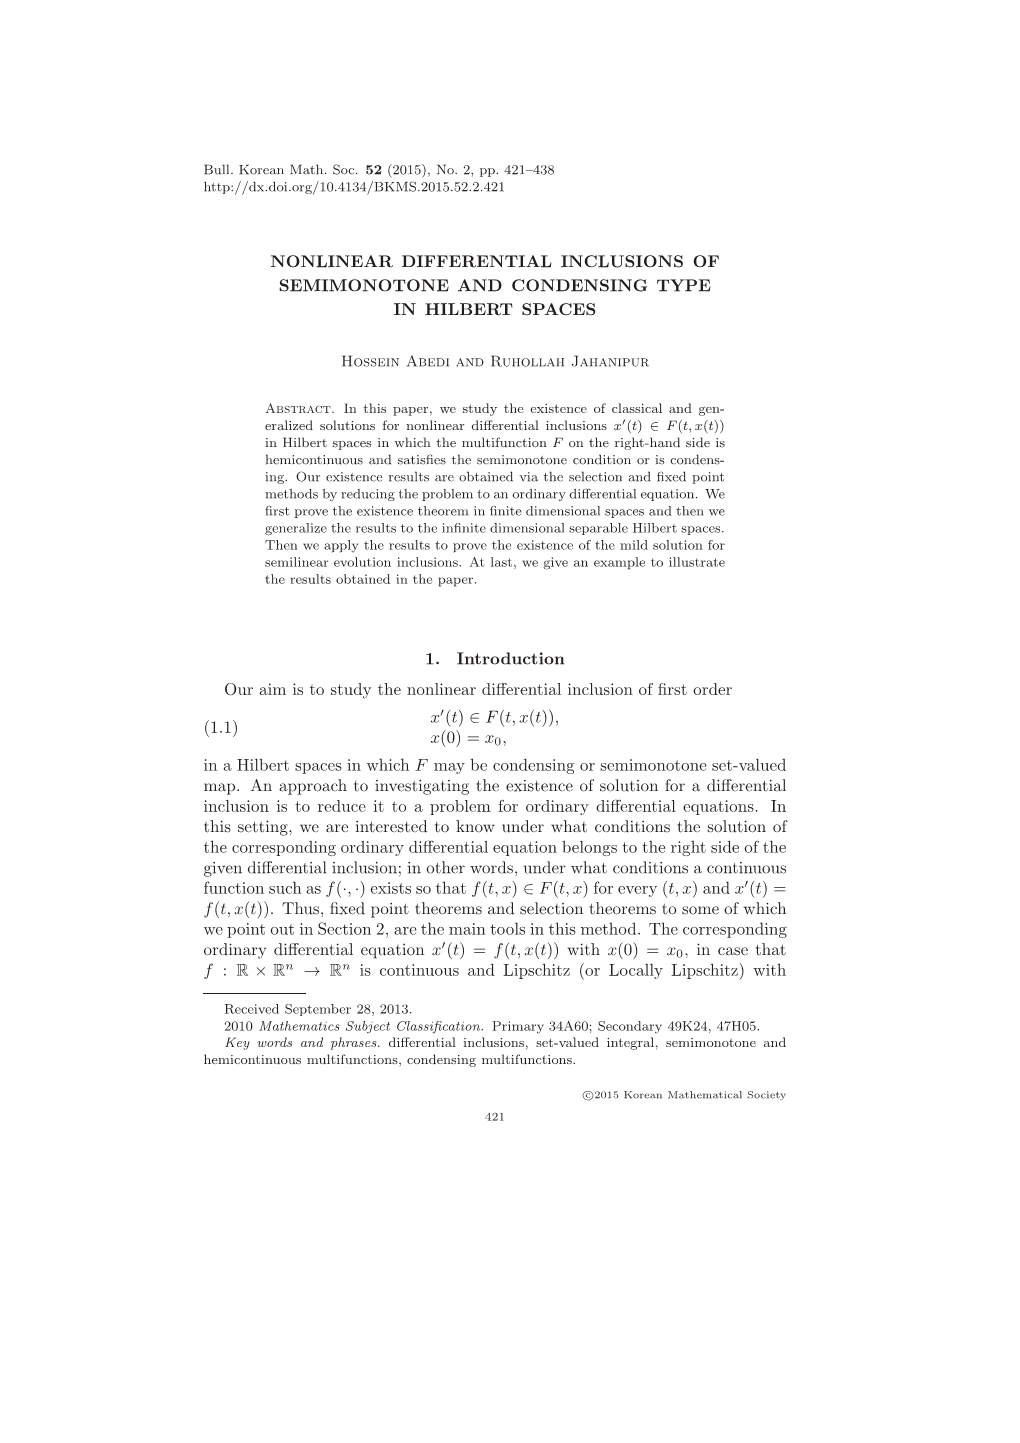 Nonlinear Differential Inclusions of Semimonotone and Condensing Type in Hilbert Spaces